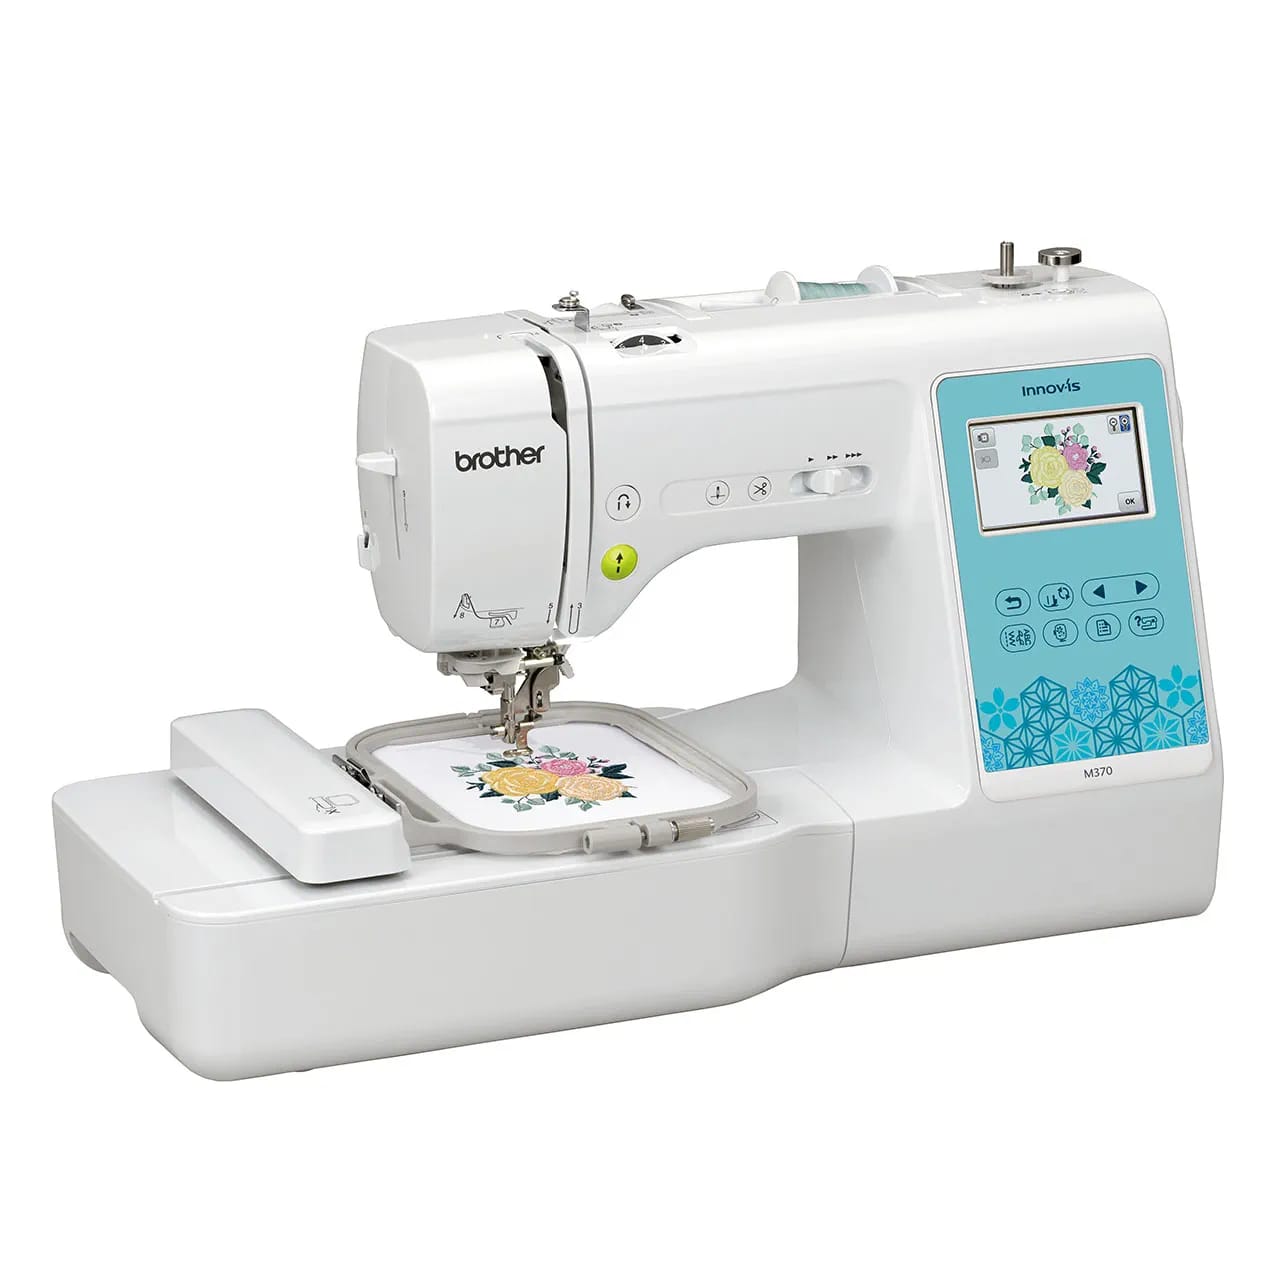 Brother M370- Innov-is Sewing & Embroidery Machine